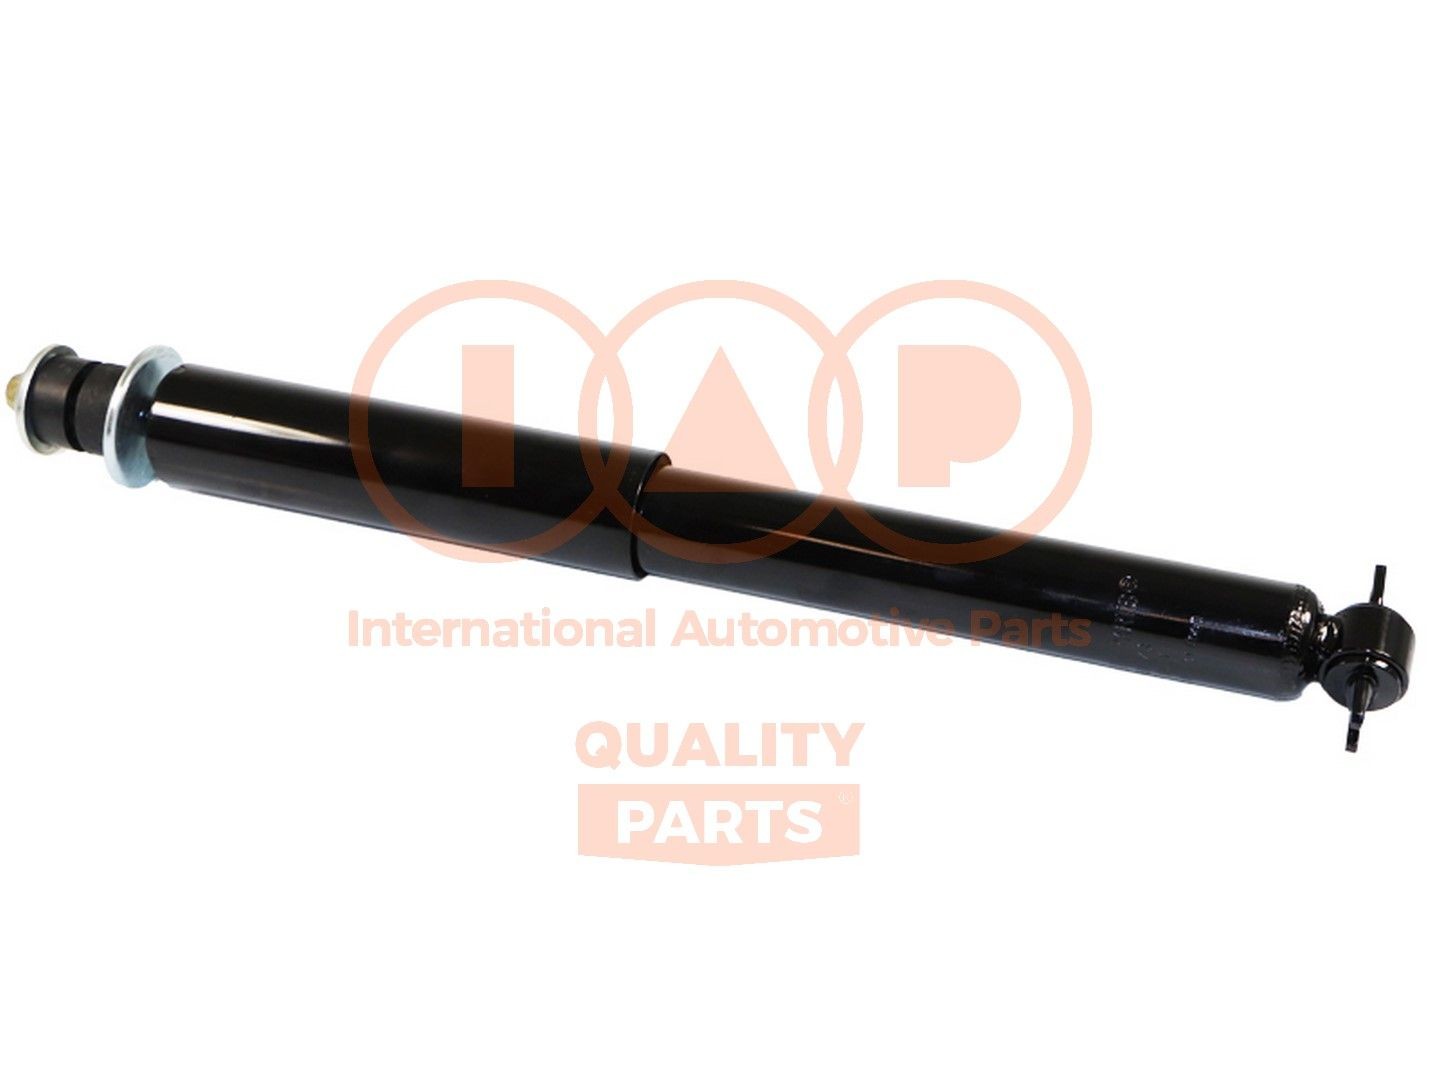 IAP QUALITY PARTS 504-10043 Shock absorber 5014 732AB